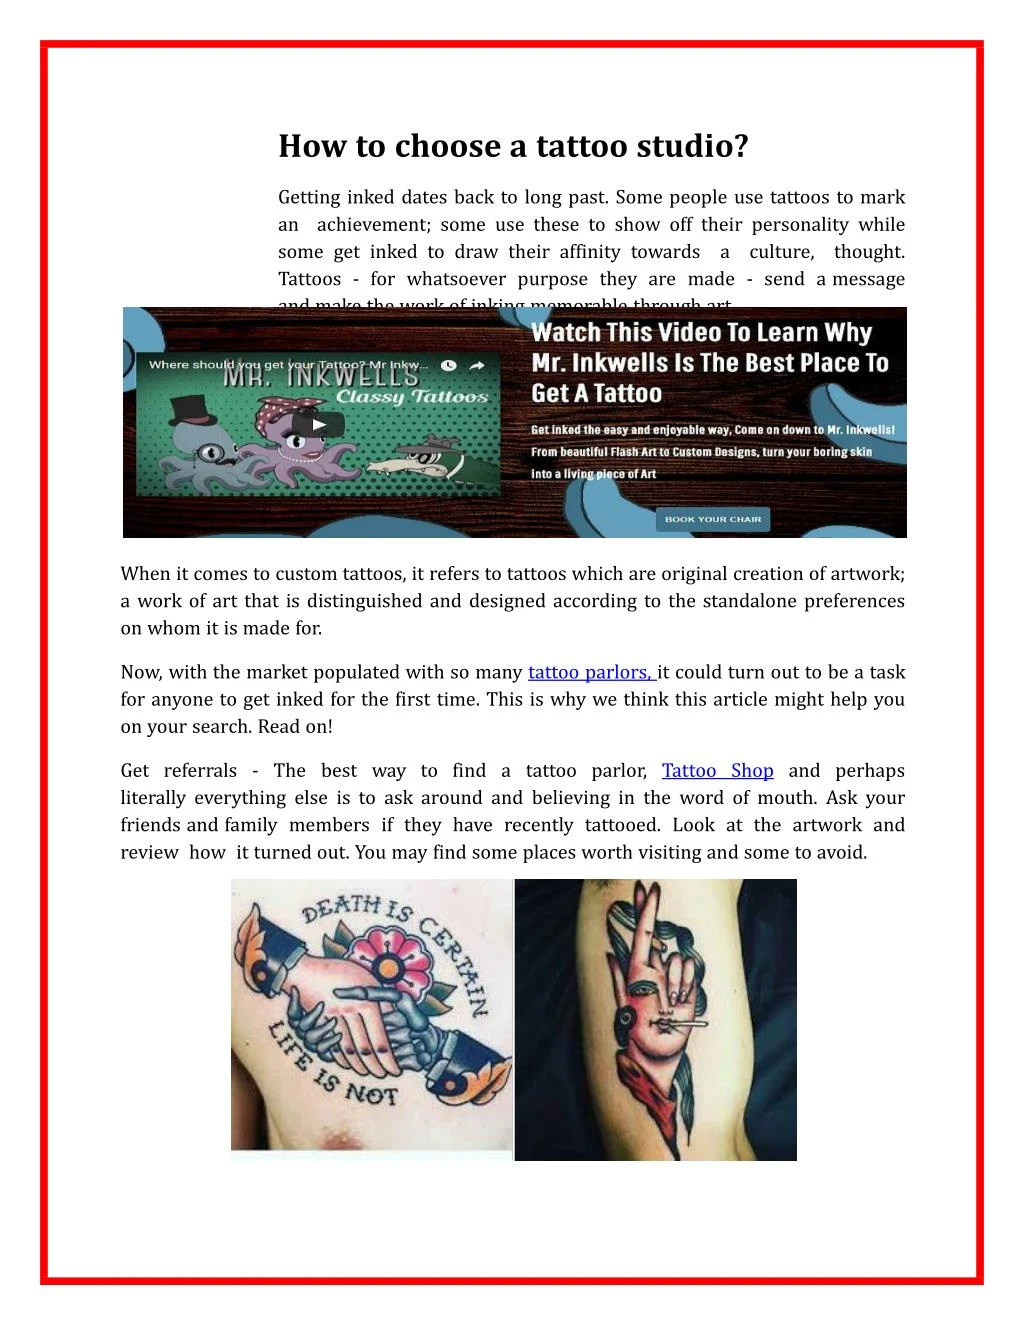 how to choose a tattoo studio getting inked dates